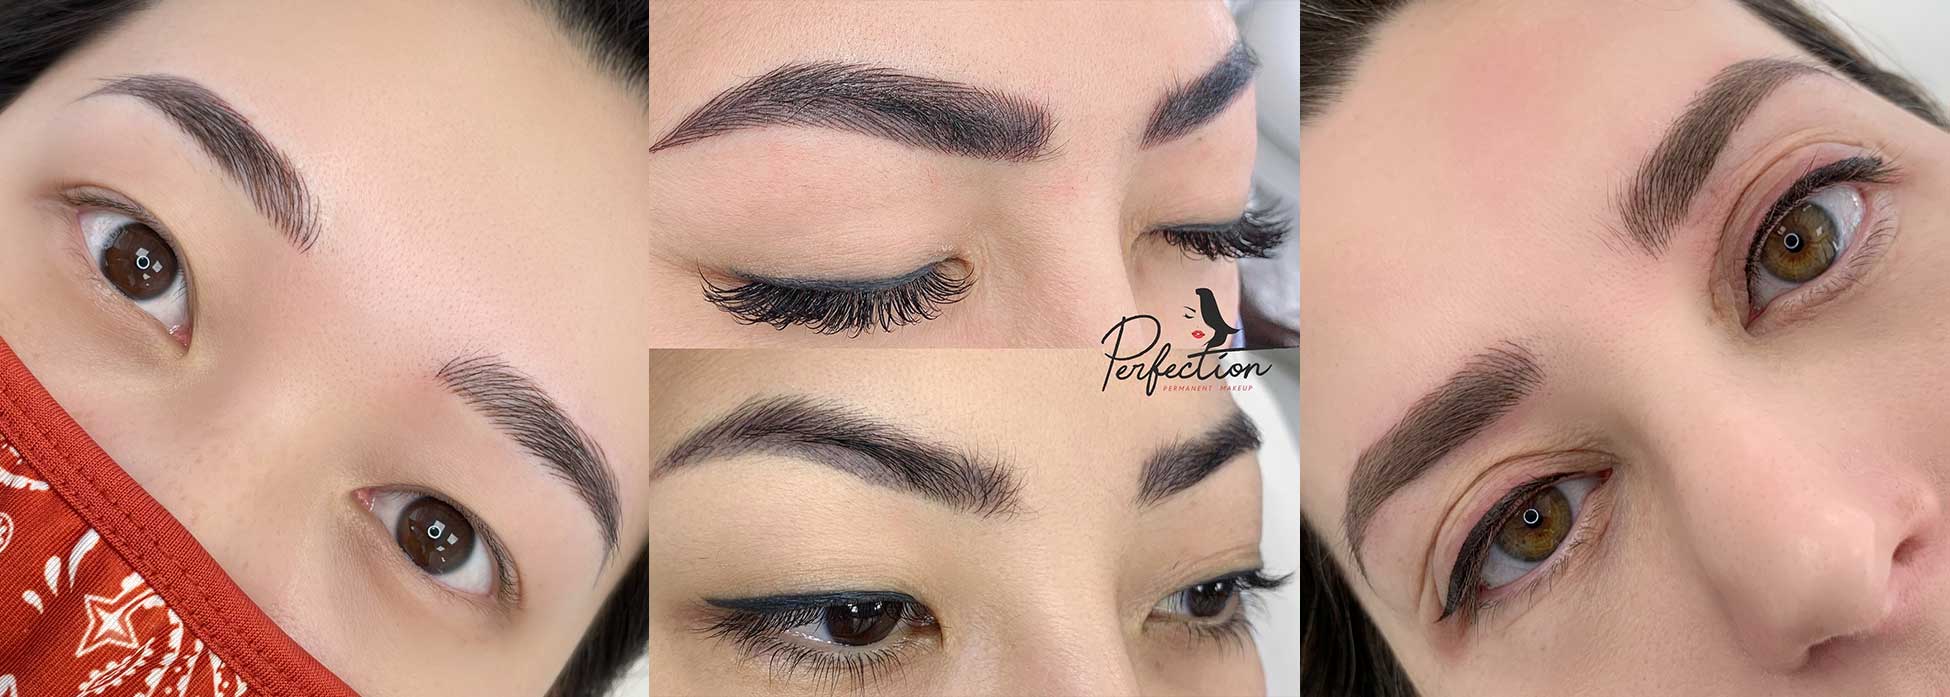 Eyebrow tattoo removal in progress⚡️Case: eyebrows done 8 years ago, 3  times. Based on a bluish color and density the ink was implanted way… |  Instagram